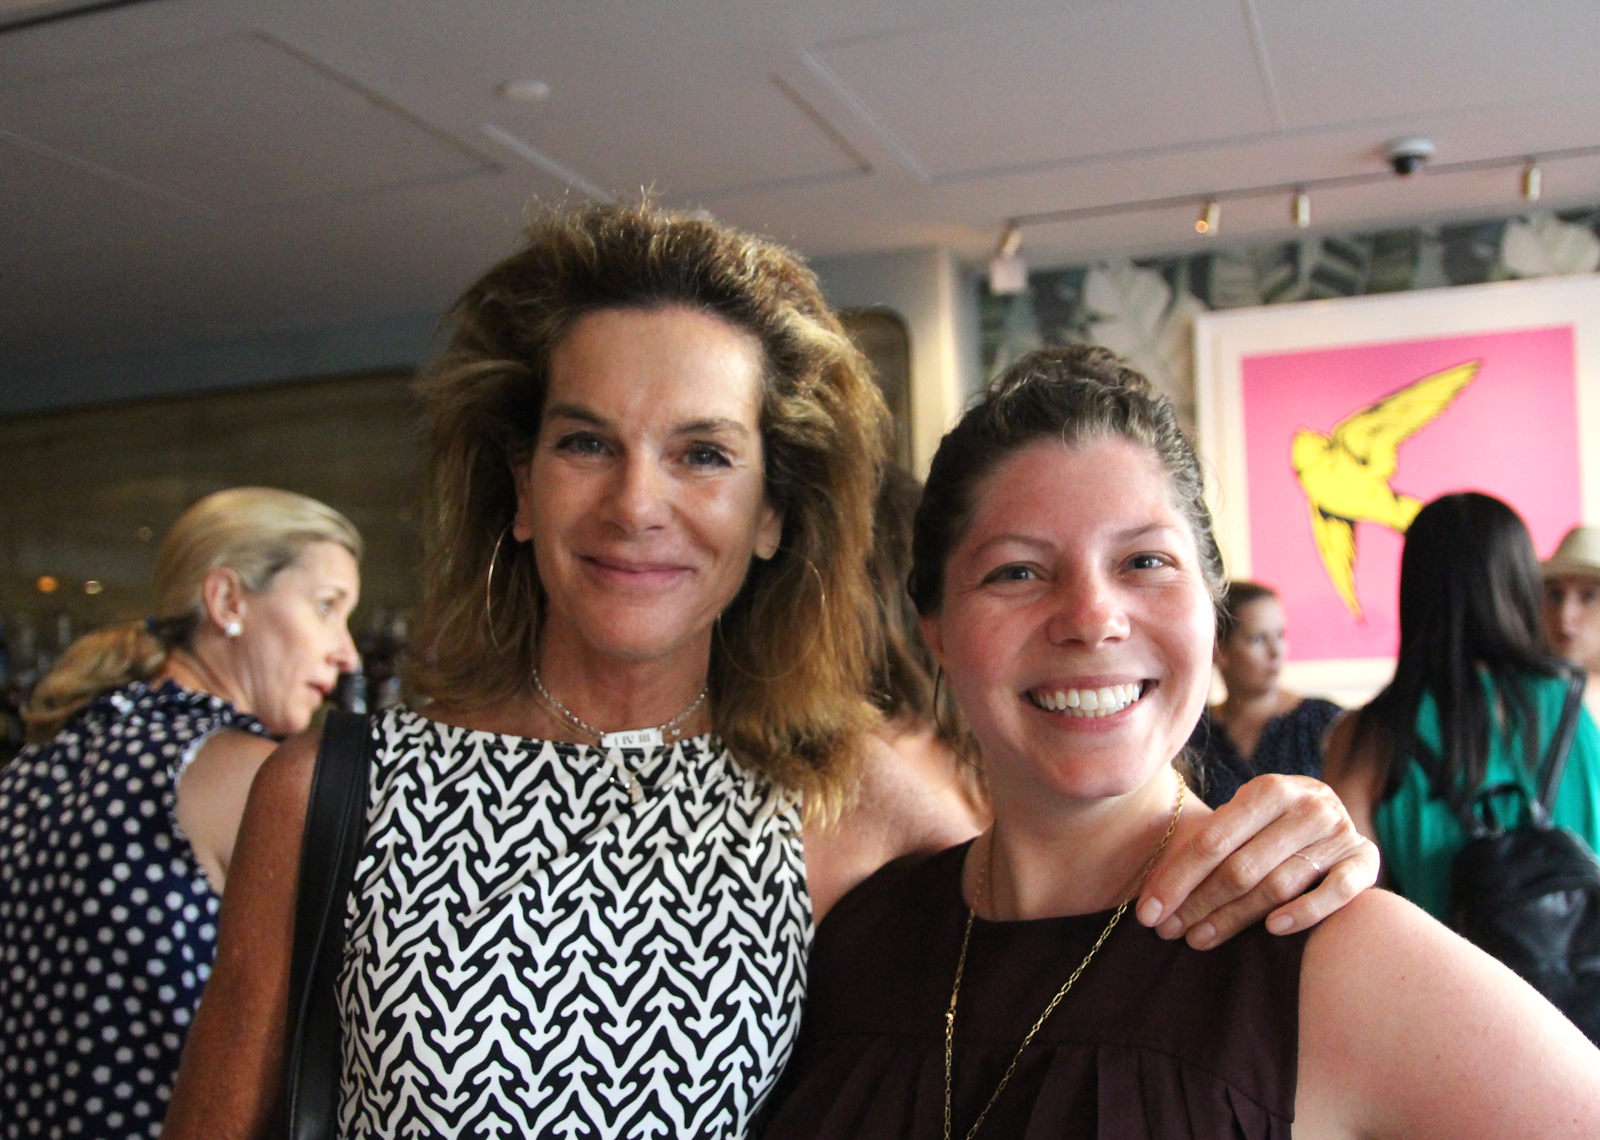 Susie Costaregni and Elizabeth Lehmann at the Little Beet Table VIP tasting event. July 15, 2019